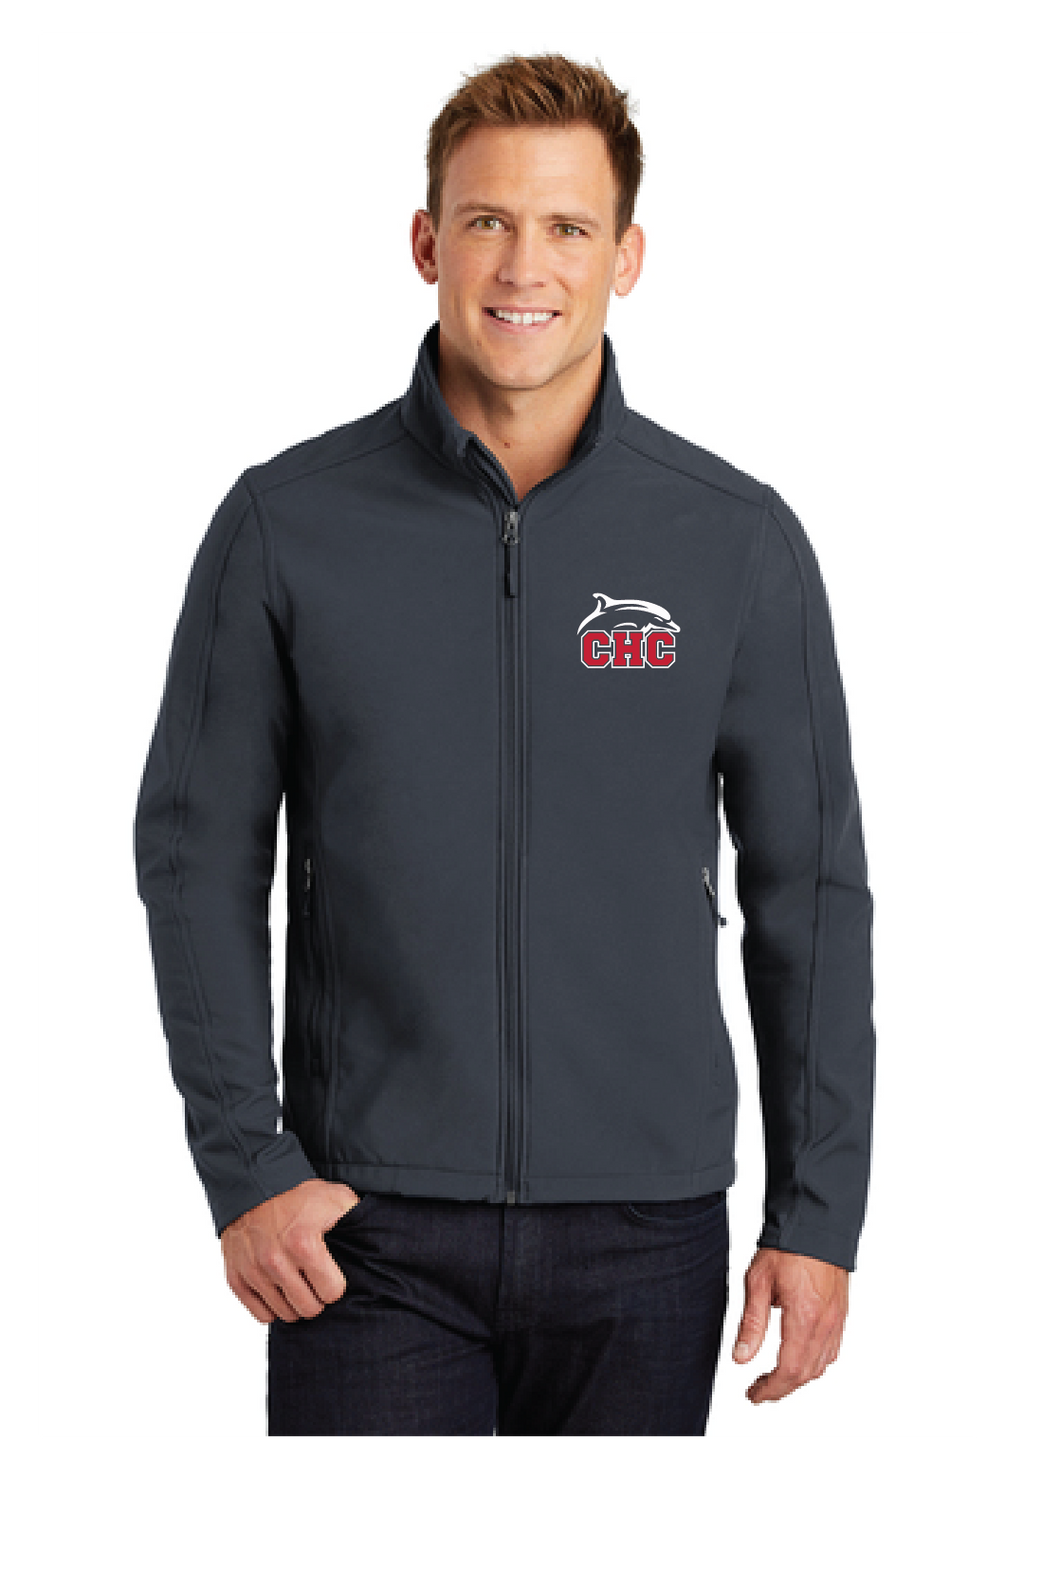 Core Soft Shell Jacket / Grey / Cape Henry Collegiate Tennis